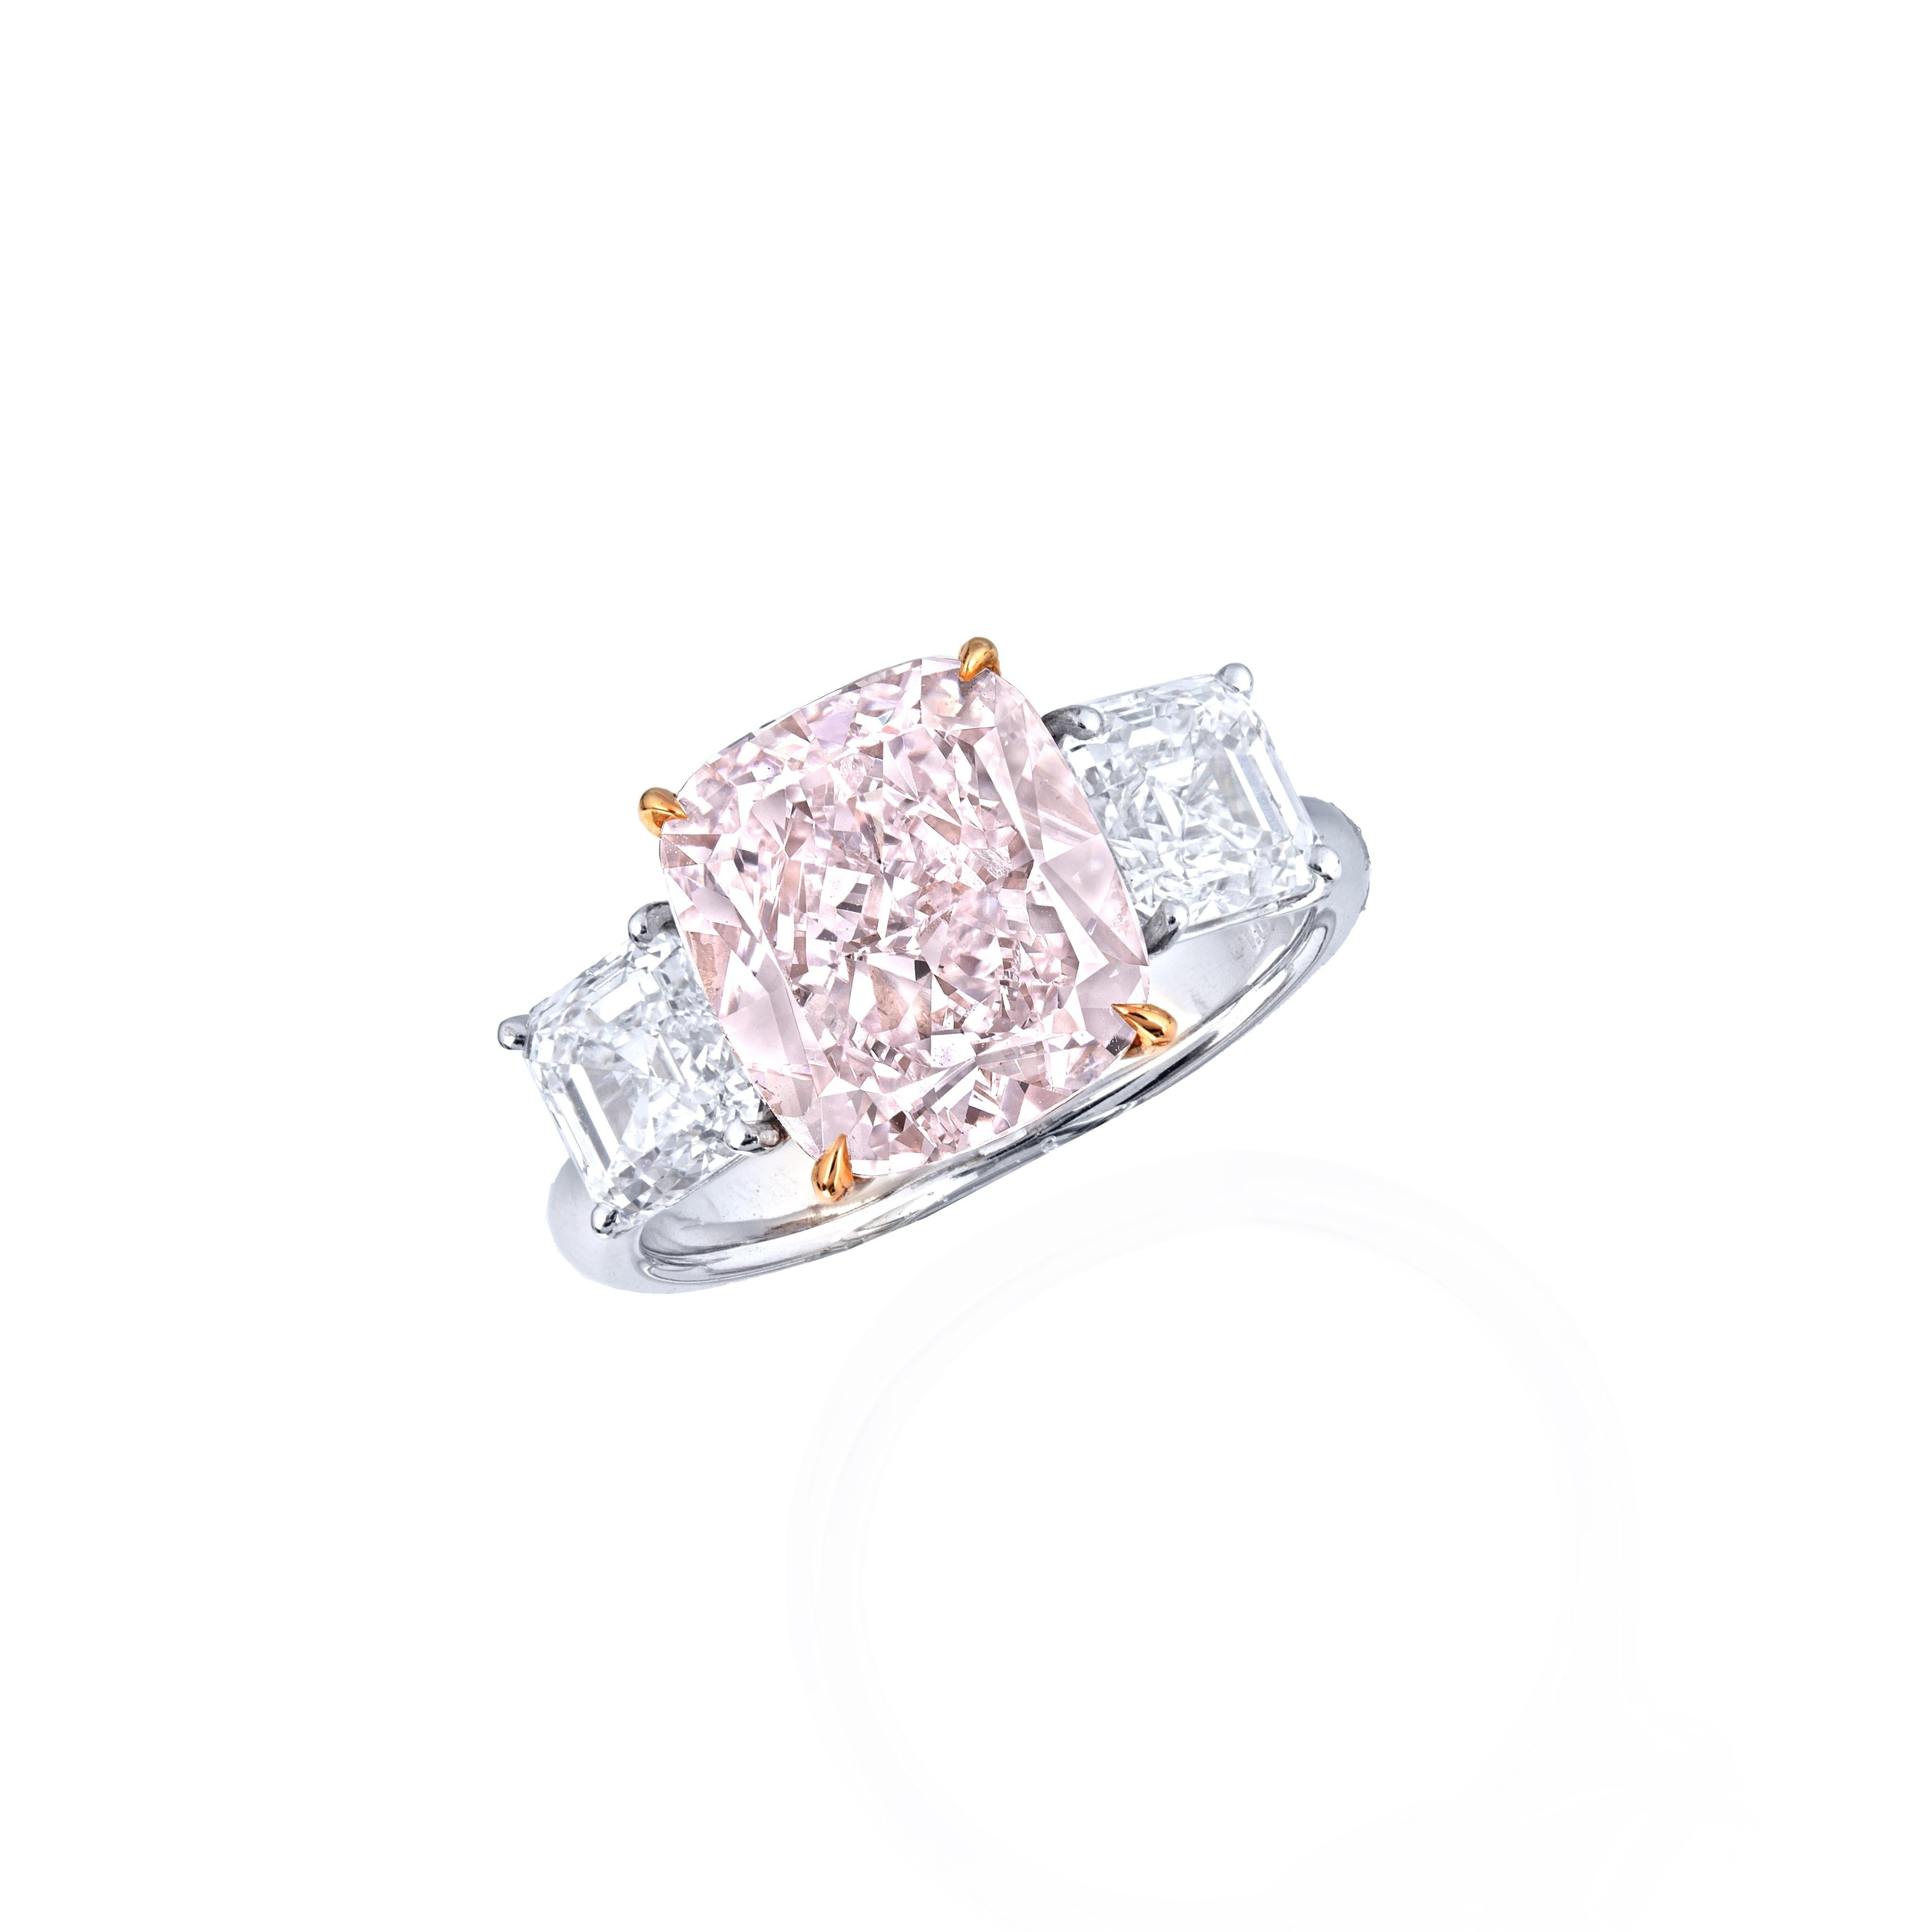 From Emilio Jewelry, a well known and respected wholesaler/dealer located on New York’s iconic Fifth Avenue, 
Sitting in the center of this magnificent investment ring is a natural Gia Certified Pink diamond weighing 5.50 carats. The hand made